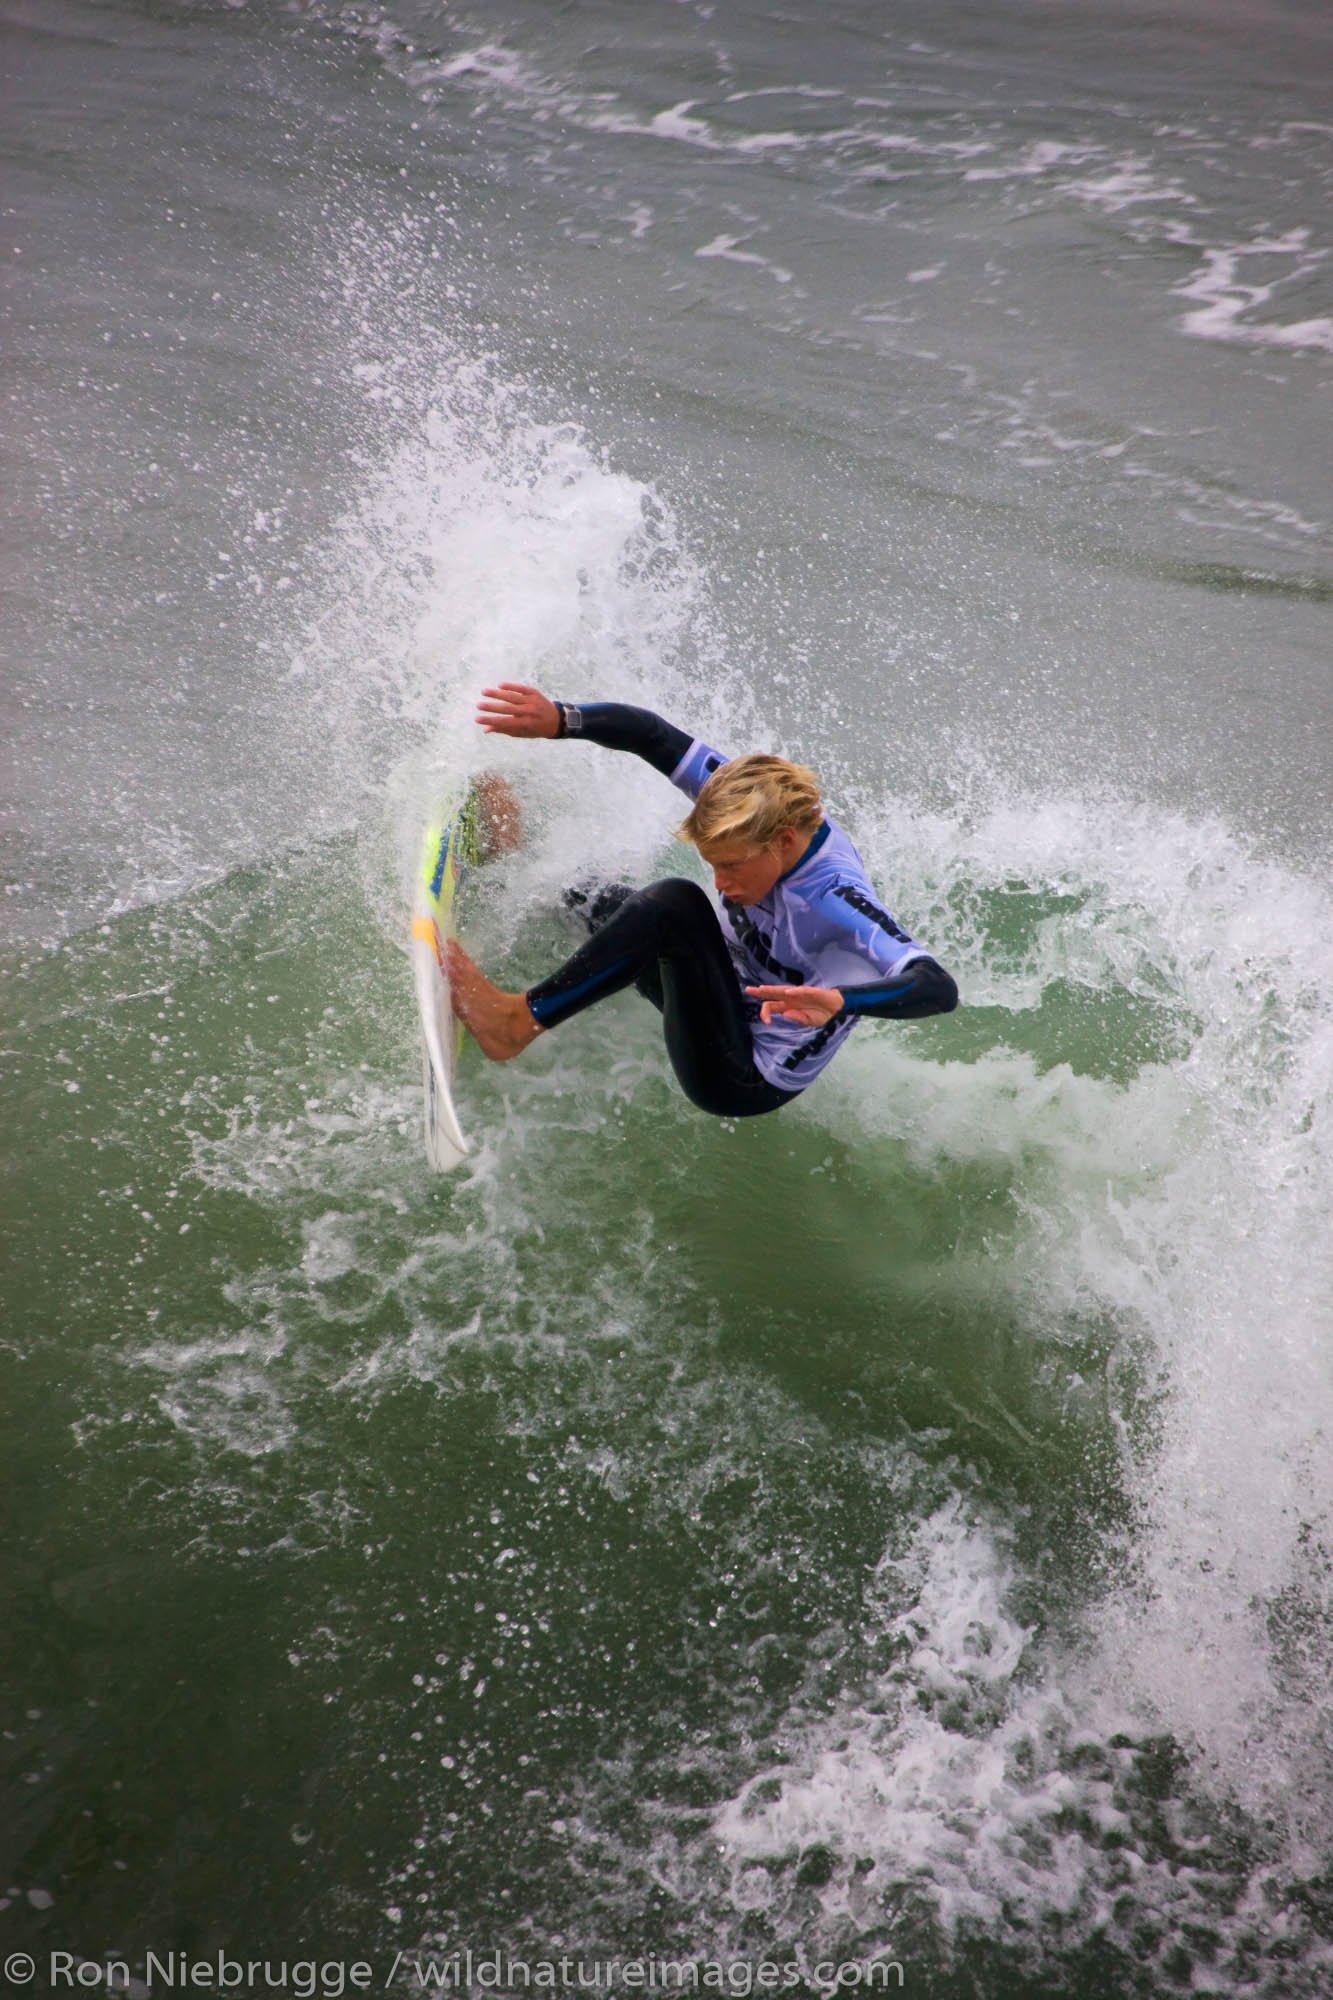 Kolohe Andino competing in the Katin Pro/Am surf competition at Huntington Beach Pier, Orange County, California.